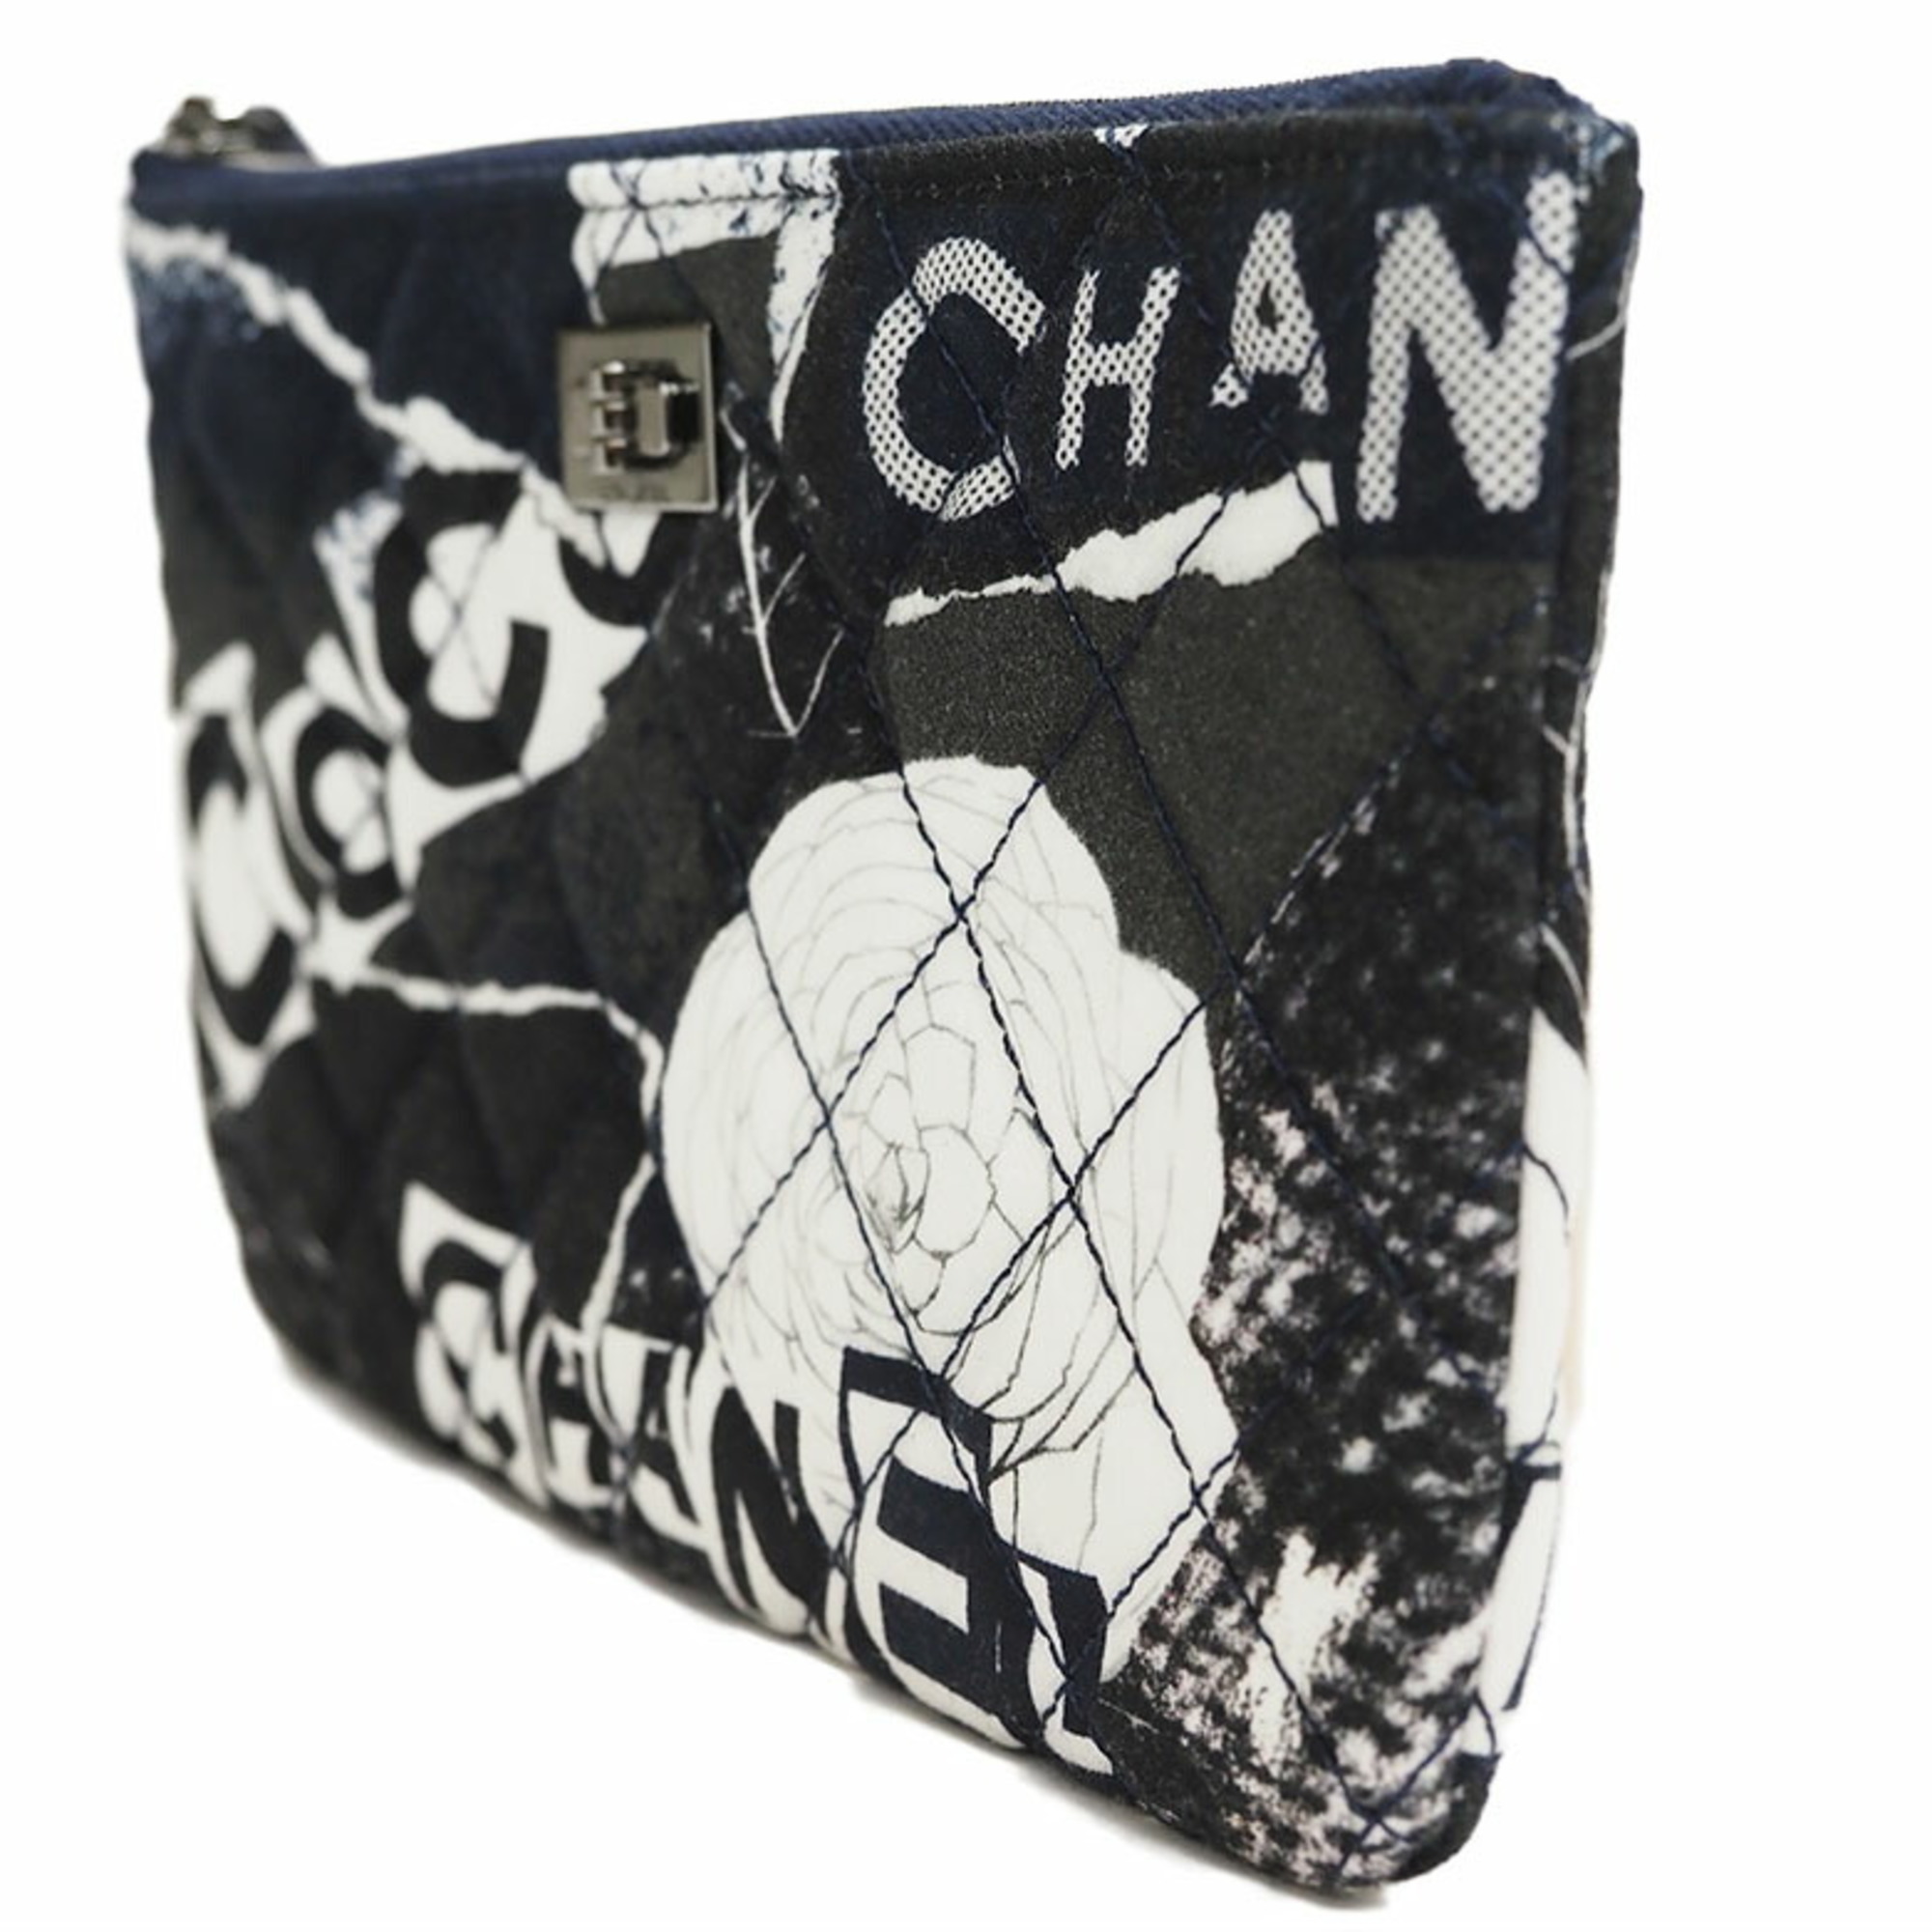 CHANEL 2.55 Quilted Pouch Navy Cotton Canvas Camellia Pattern Women's Flat